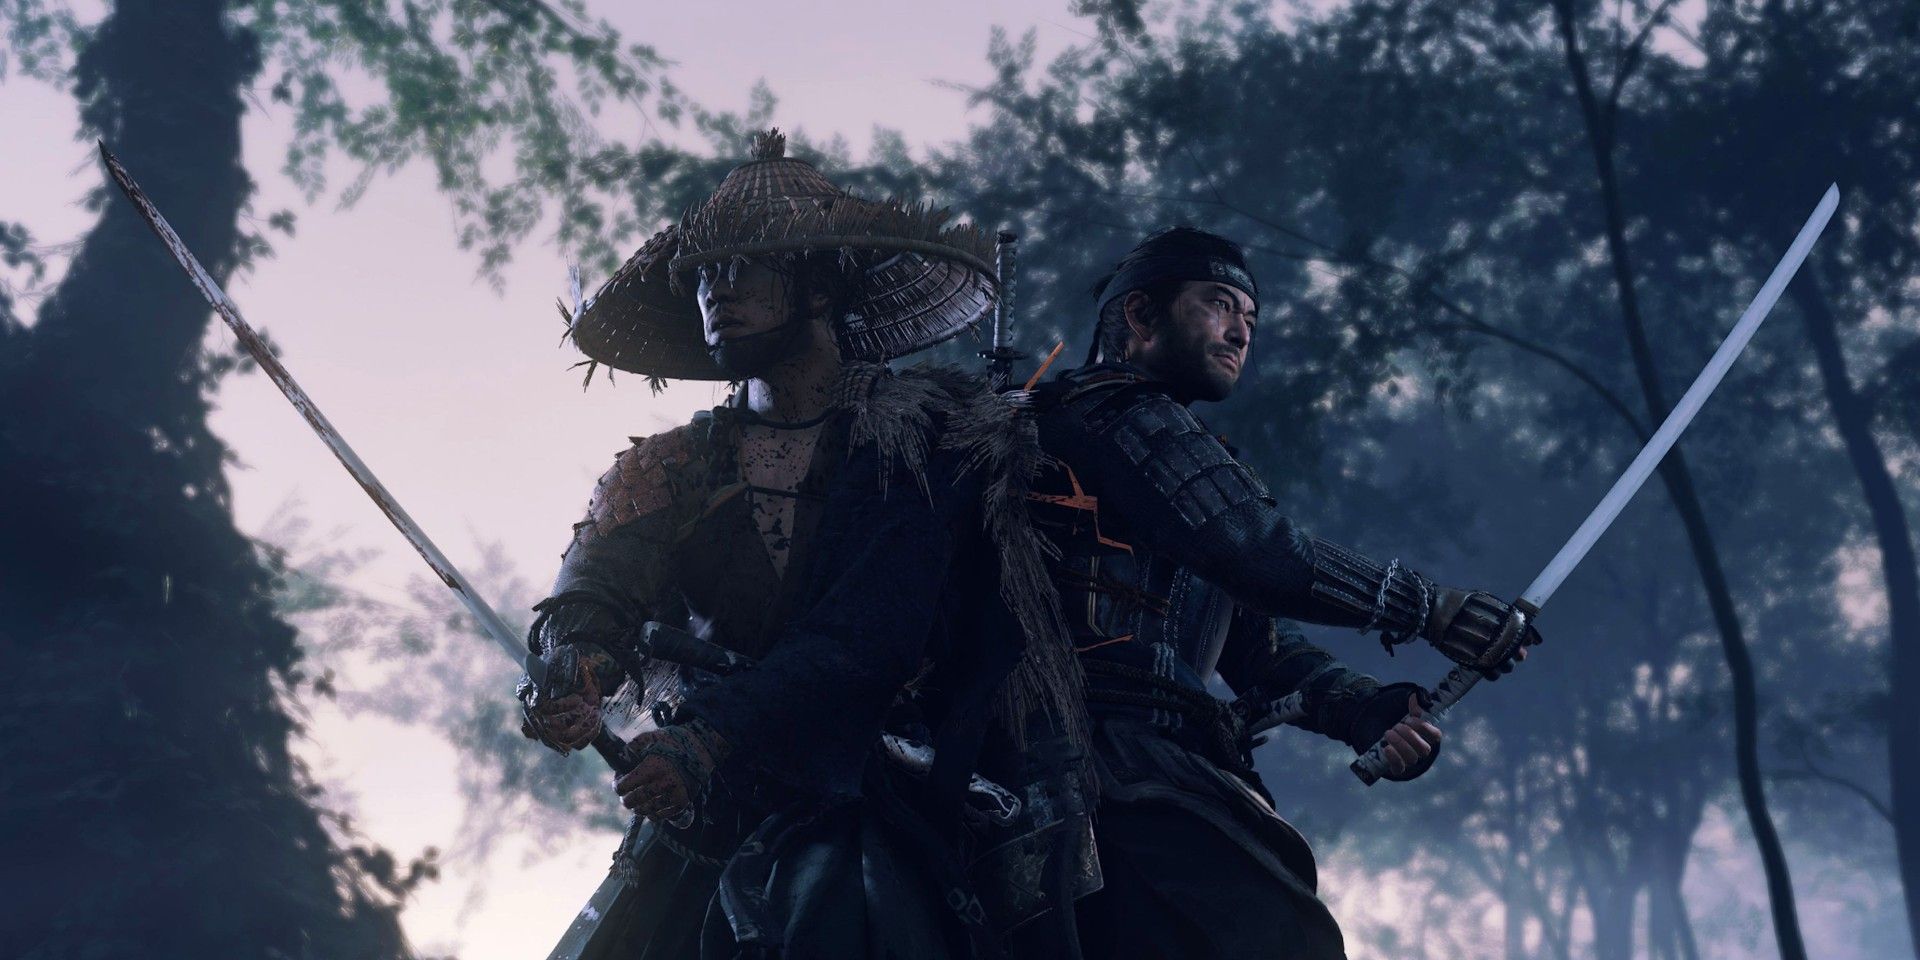 Lethal Difficulty In Ghost Of Tsushima Is Perfect For Replays - KeenGamer